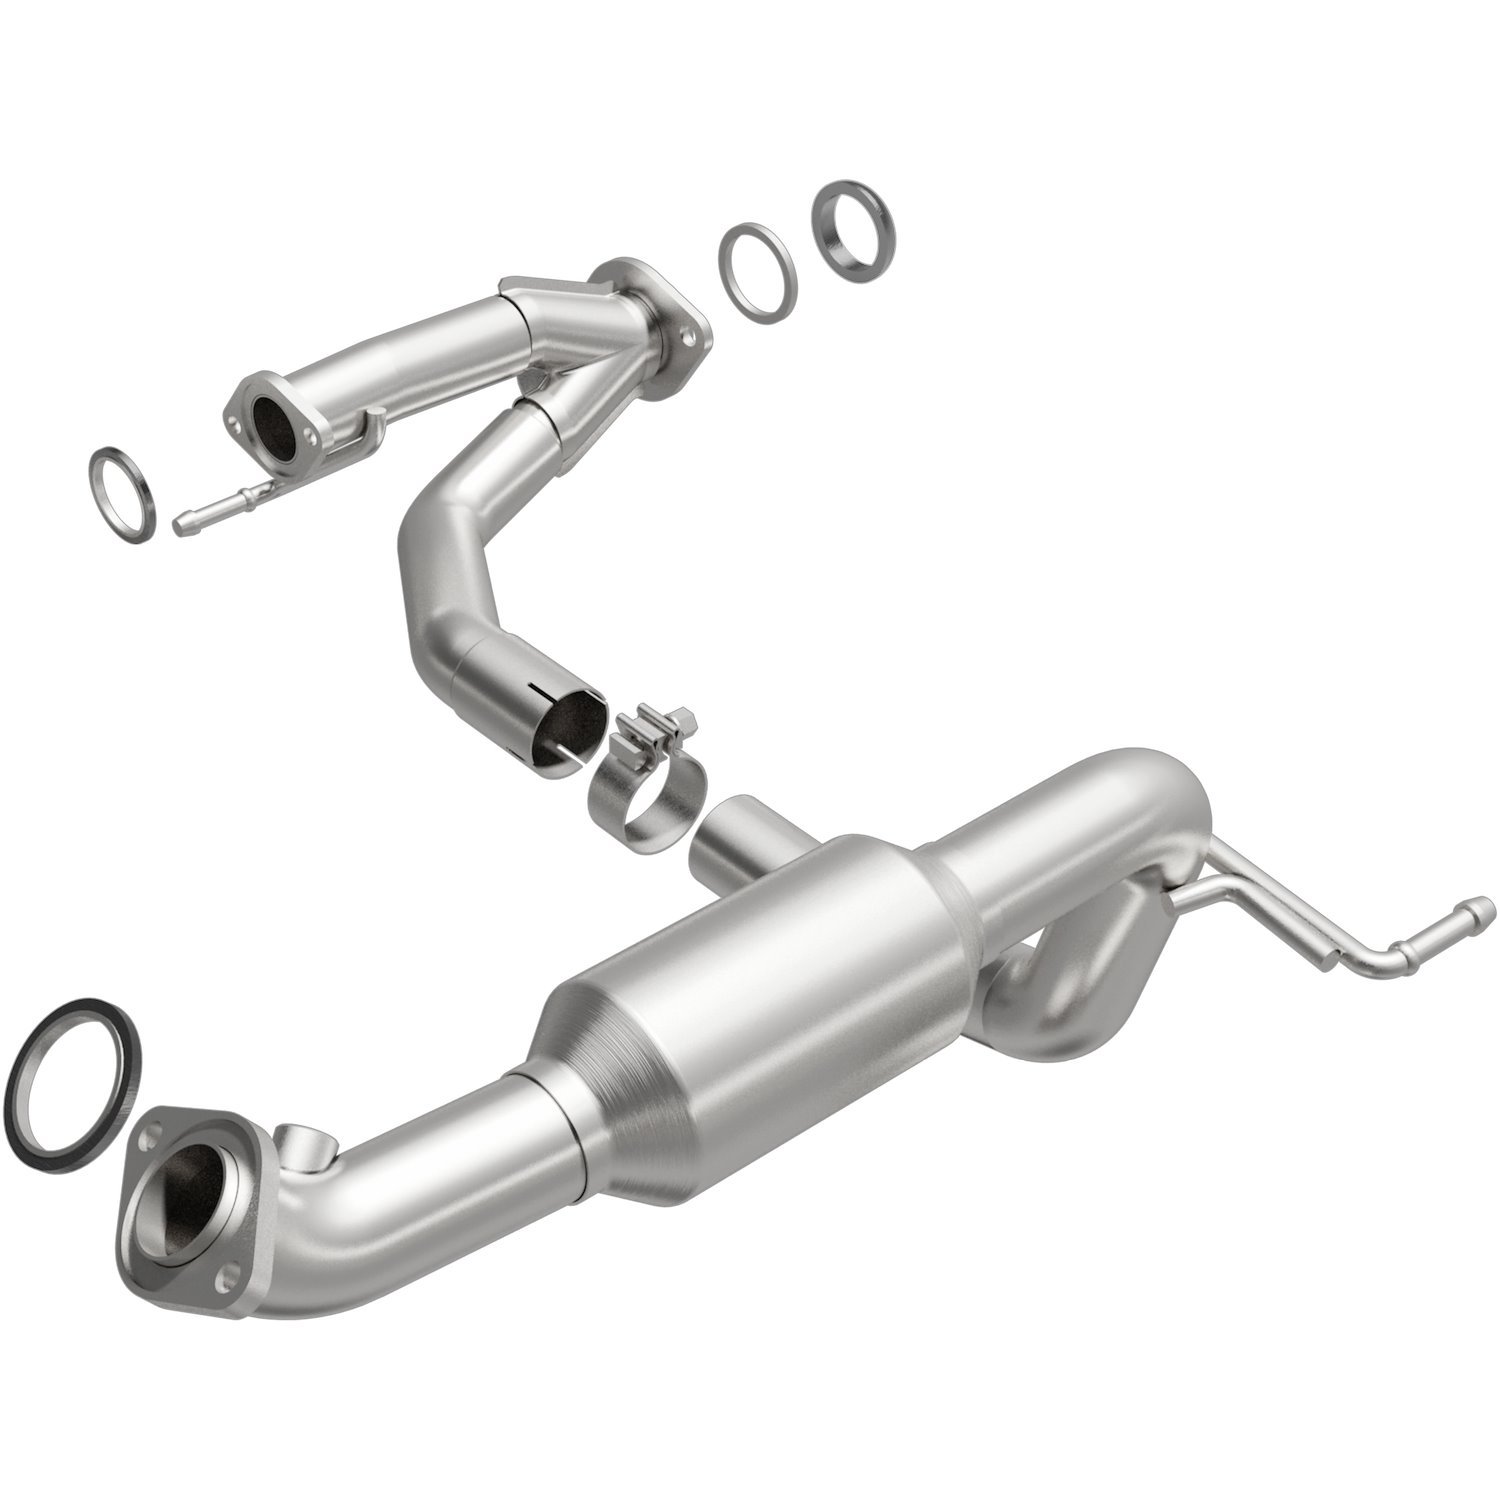 2005-2011 Toyota Tacoma OEM Grade Federal / EPA Compliant Direct-Fit Catalytic Converter